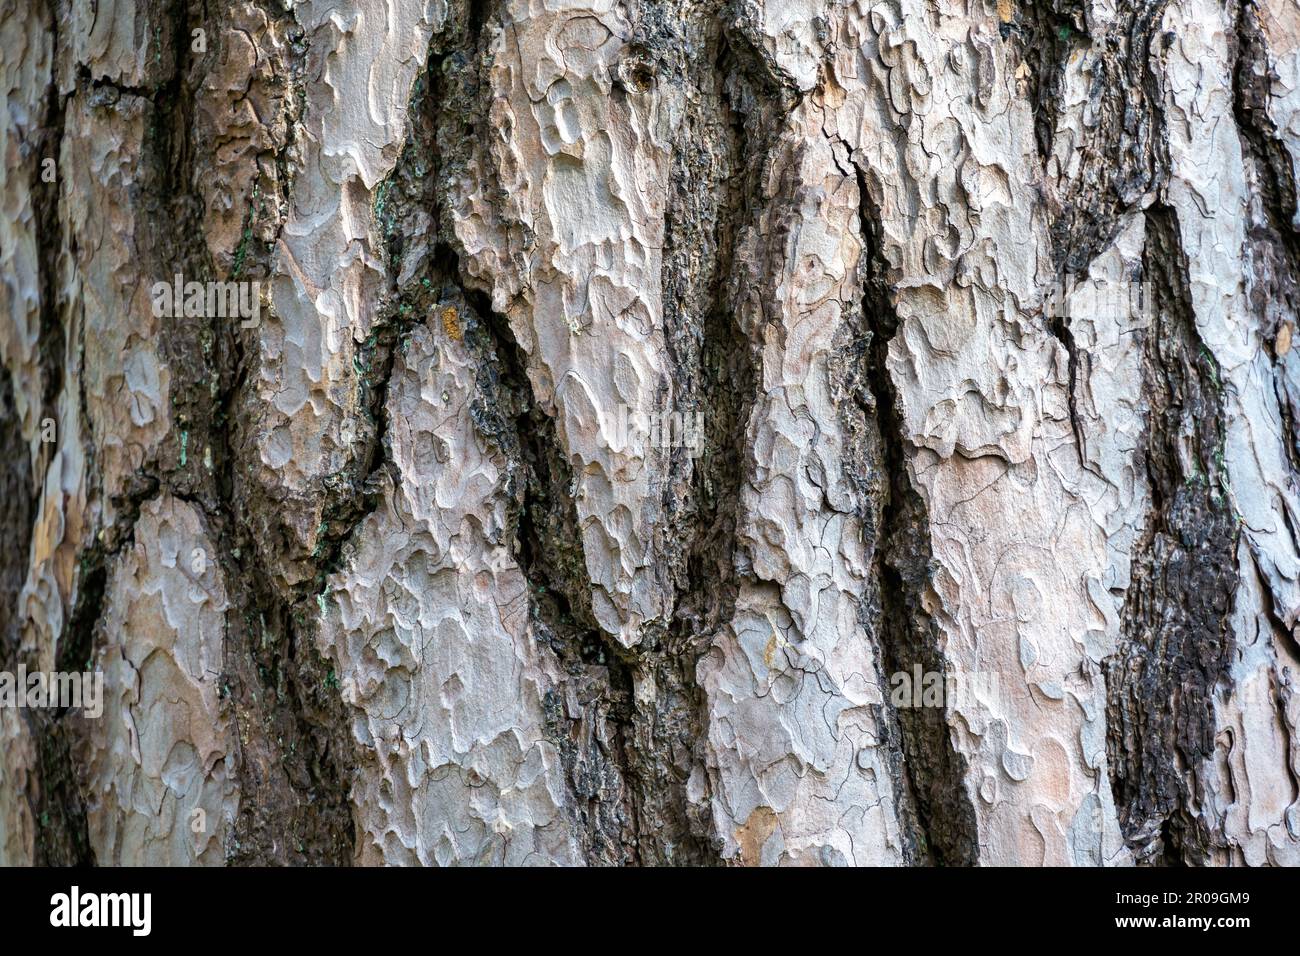 Textures pine tree bark, close up, use as a background Stock Photo